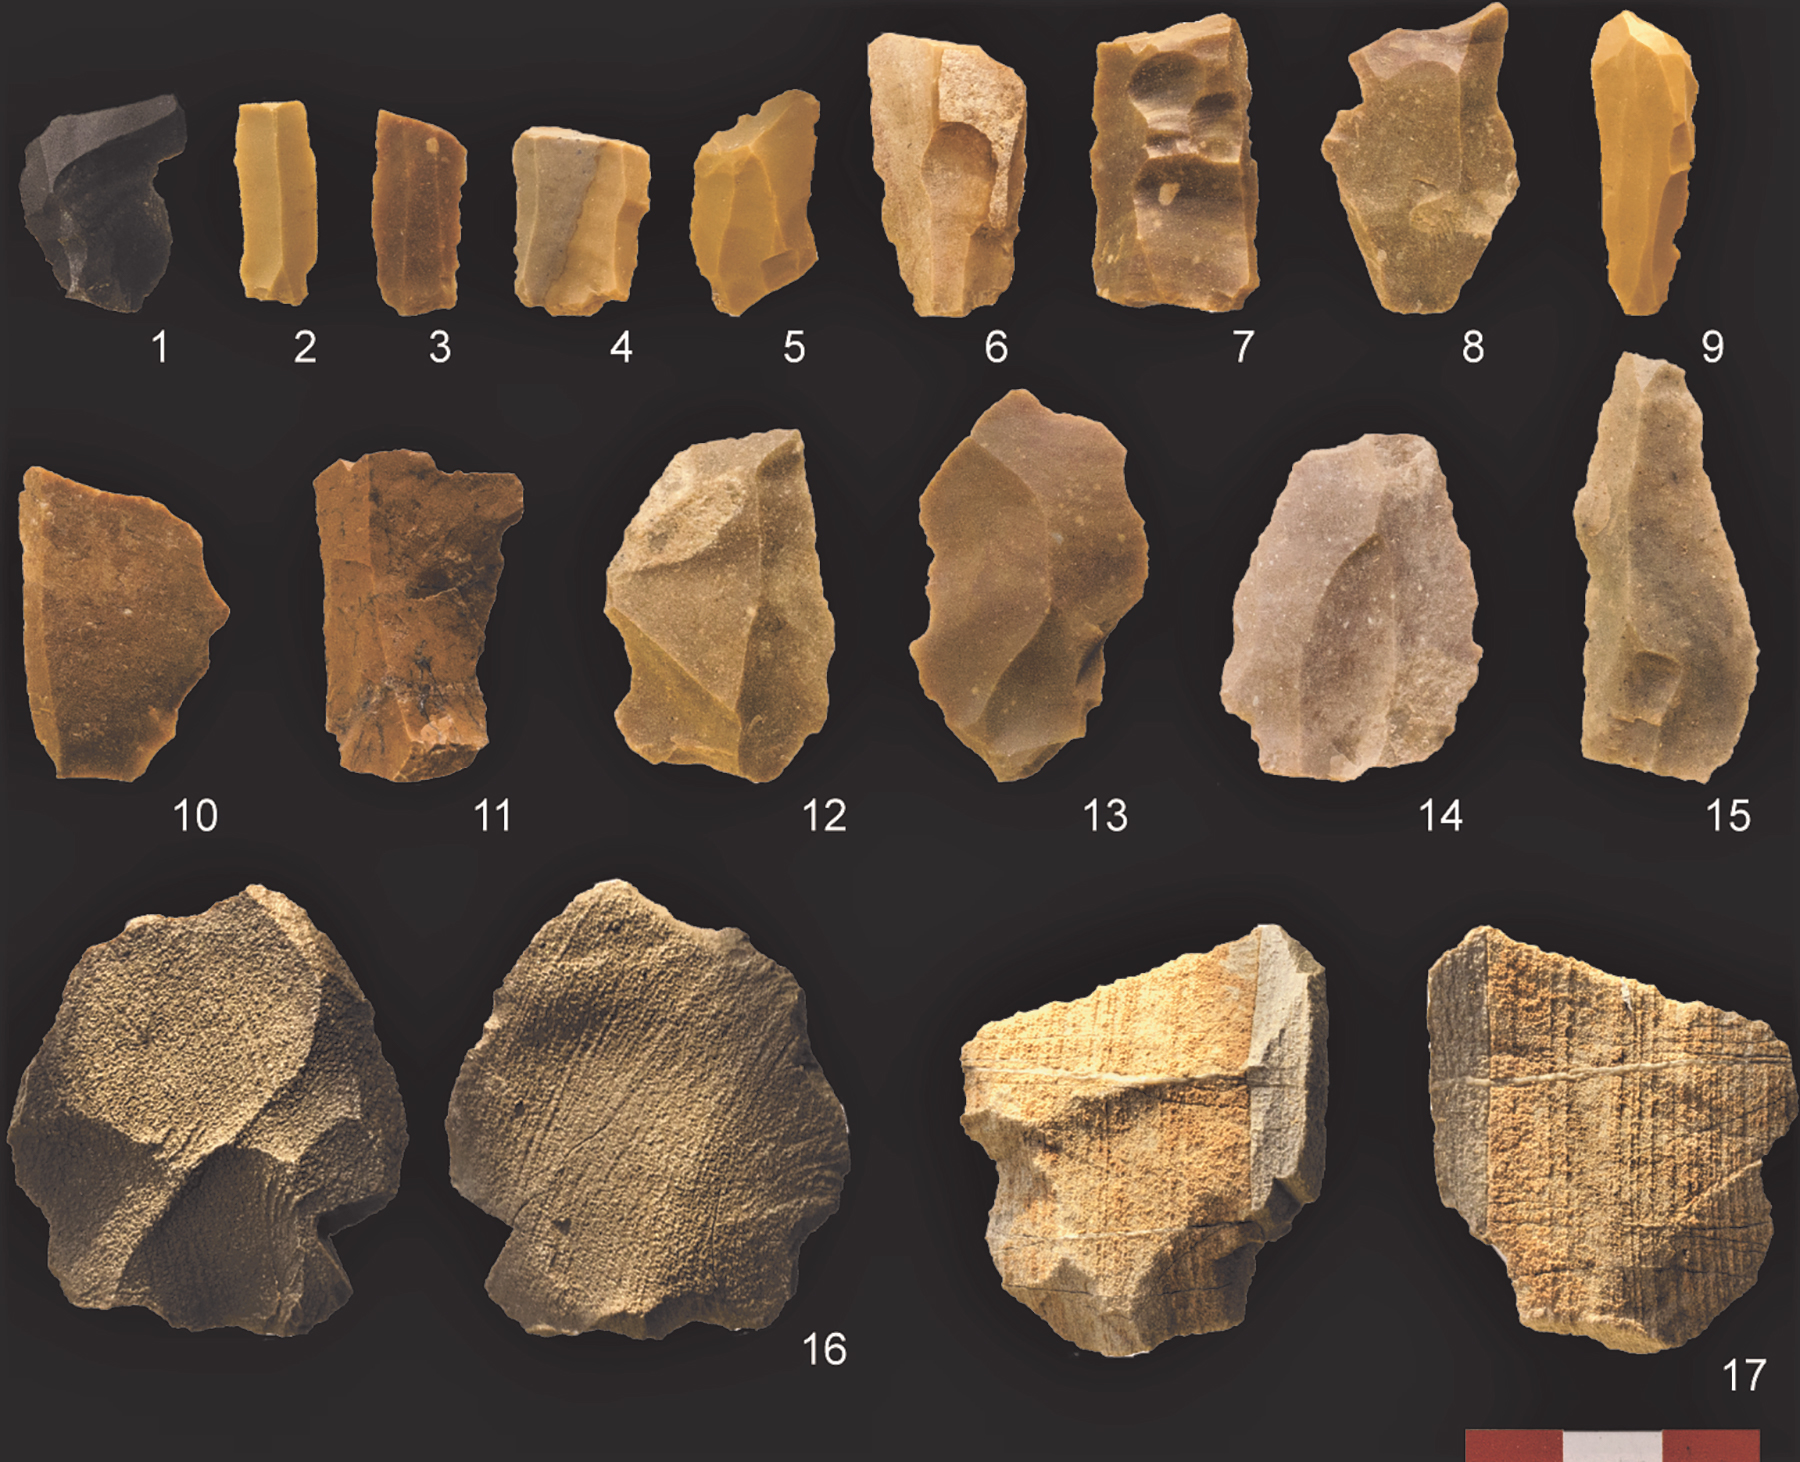 Lithics recovered from the eastern flank of the site (A-28). All stone artefacts show great diversity in raw materials using non-local flint and chert variants. The two larger pieces – 16 and 17 are of possible Palaeolithic age